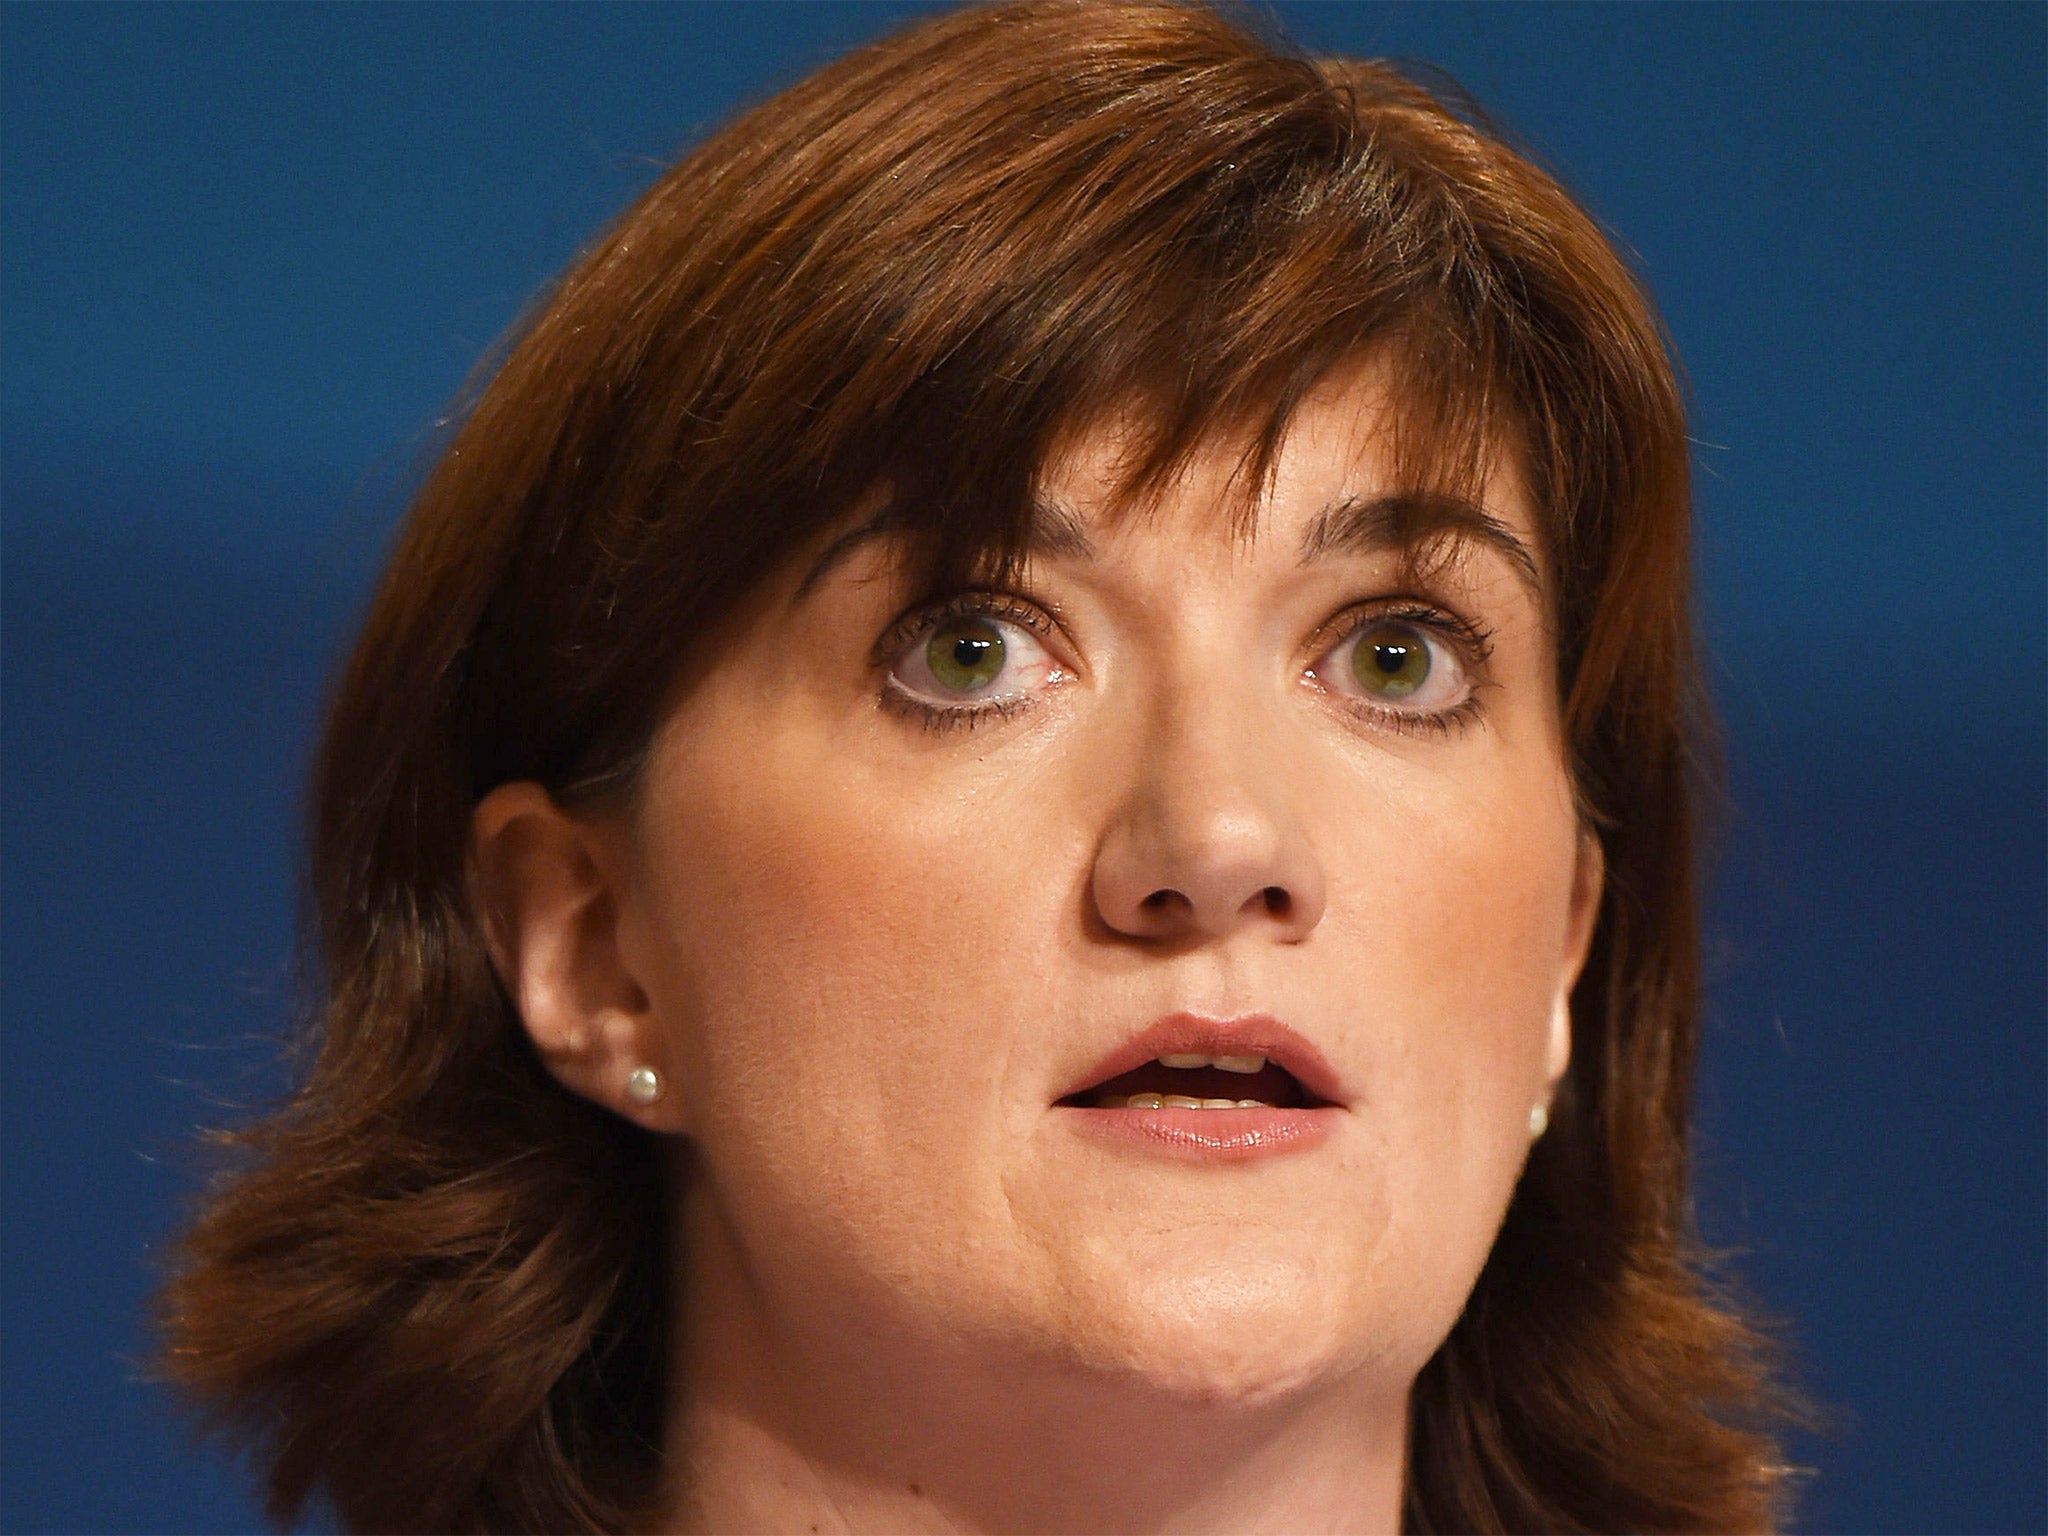 Education secretary Nicky Morgan has shut down an a free school in the North-east after a damning inspection report